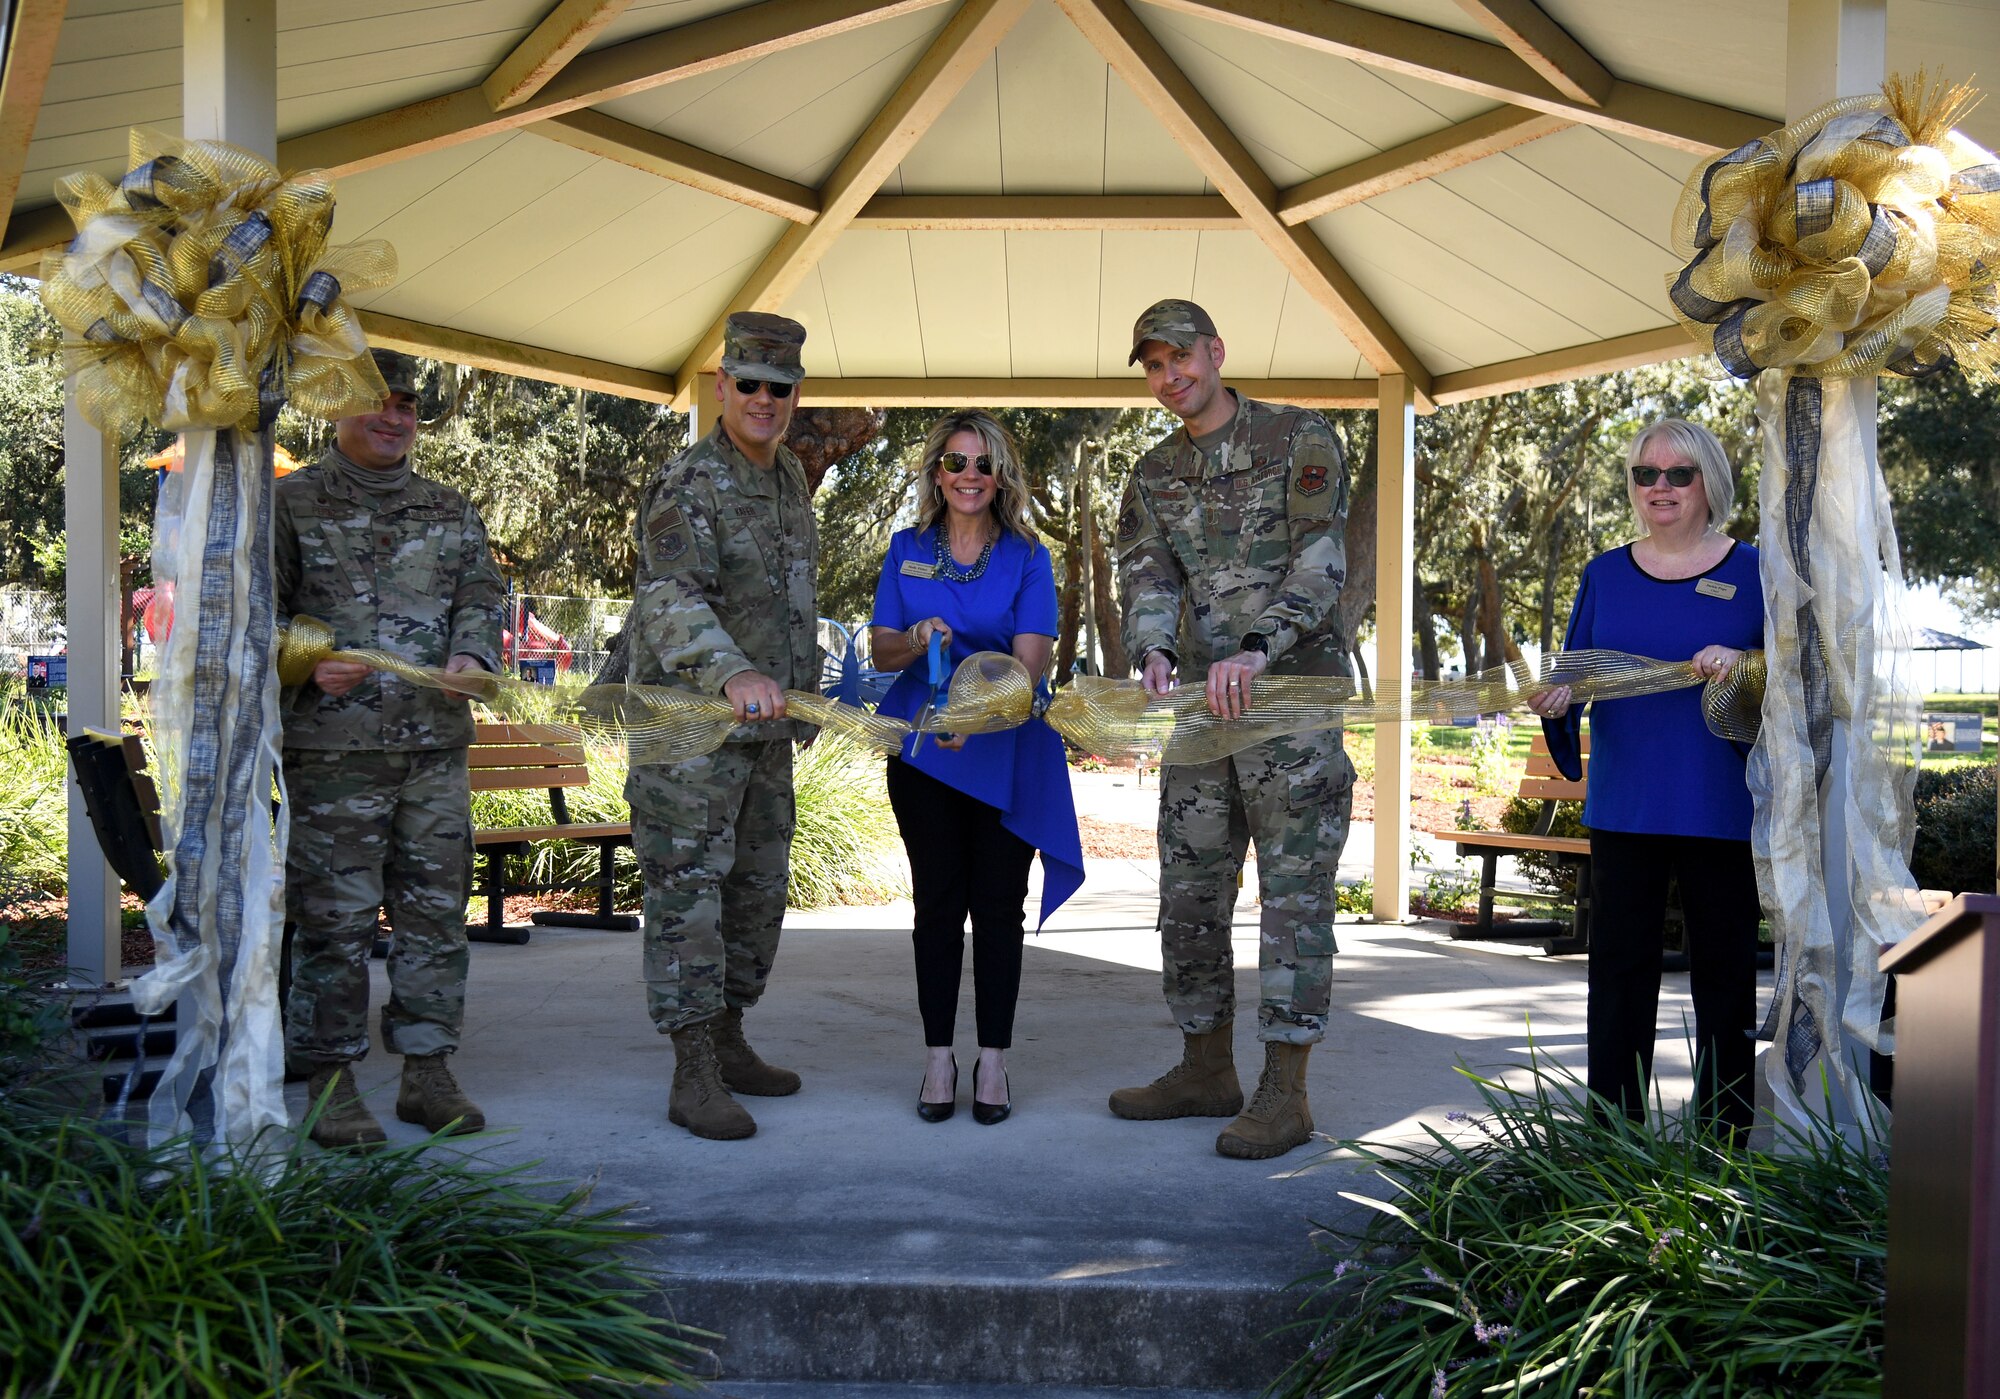 Keesler personnel participate in a ribbon cutting ceremony during the Air Force Families Forever Fallen Heroes Butterfly Garden dedication ceremony at the marina park at Keesler Air Force Base, Mississippi, Sept. 24, 2021. The garden was created as a designated location where the families of our fallen heroes can find a serene area to pay tribute to their loved one as well as honoring our fallen service members. (U.S. Air Force photo by Kemberly Groue)